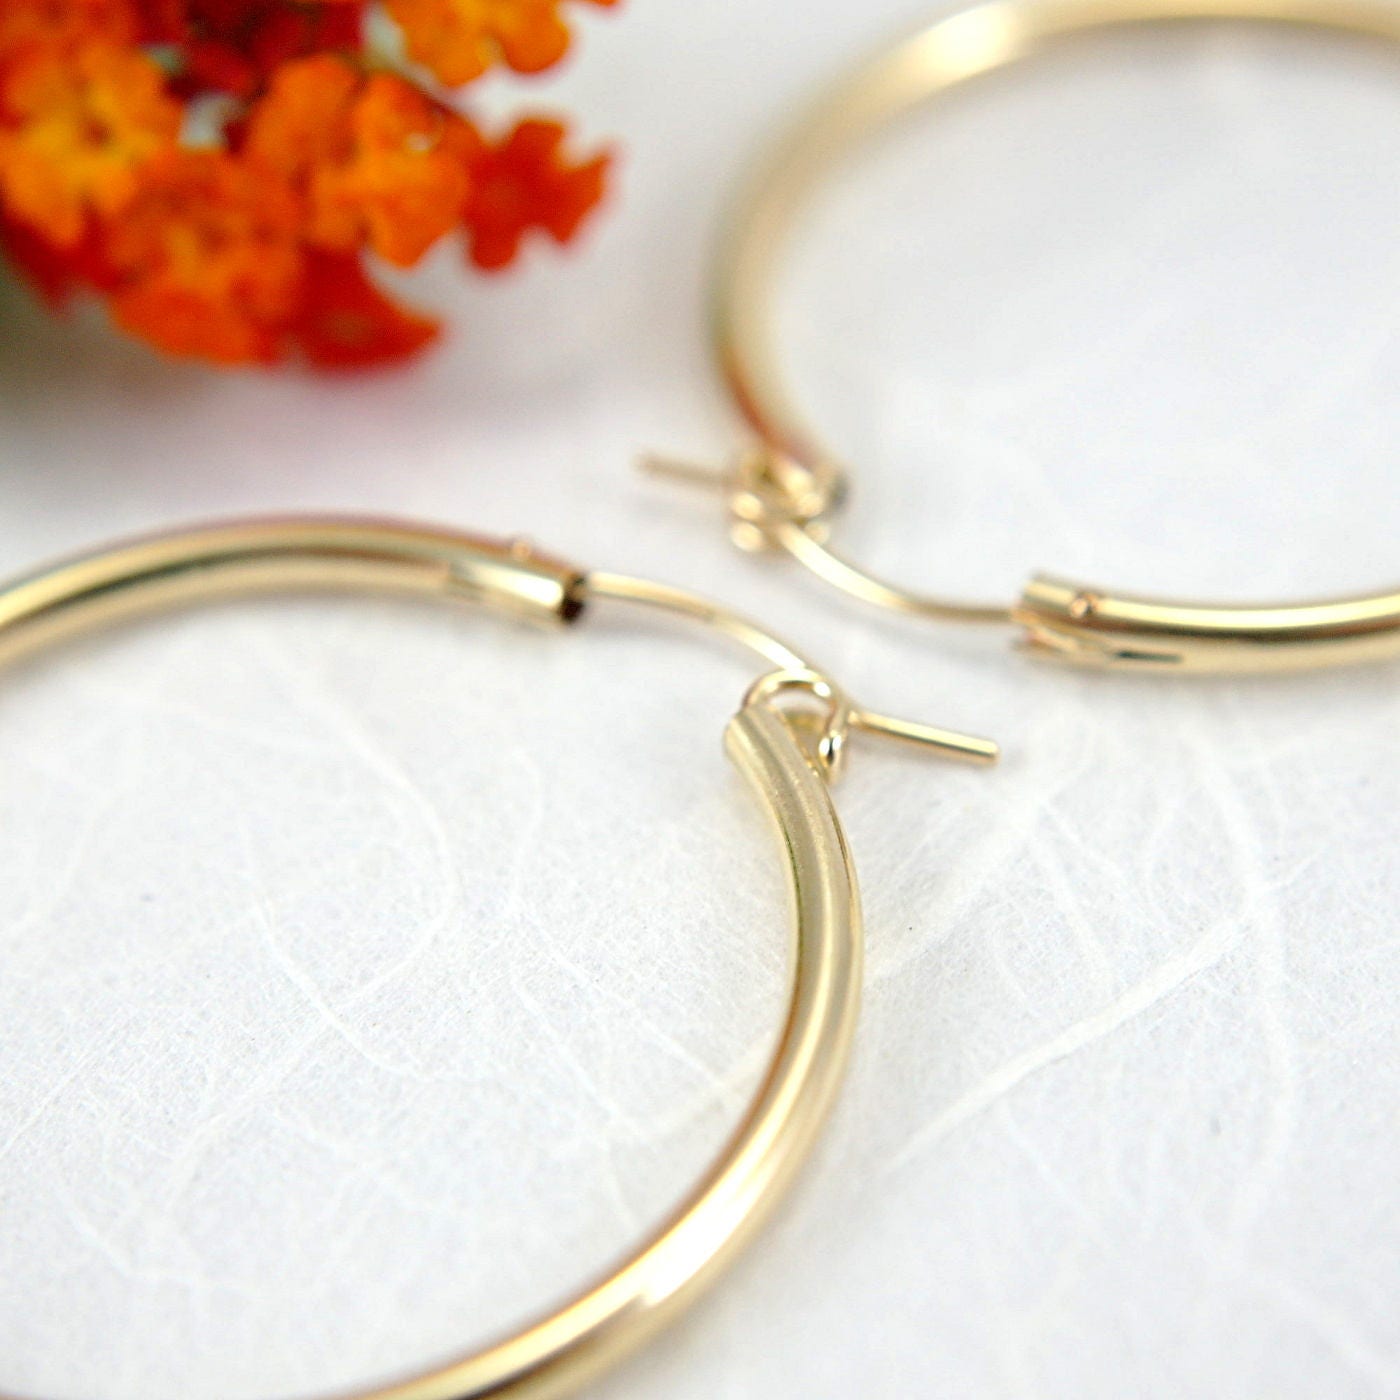 34mm 14k yellow gold filled hoop earrings large size 1.34 inch | Etsy